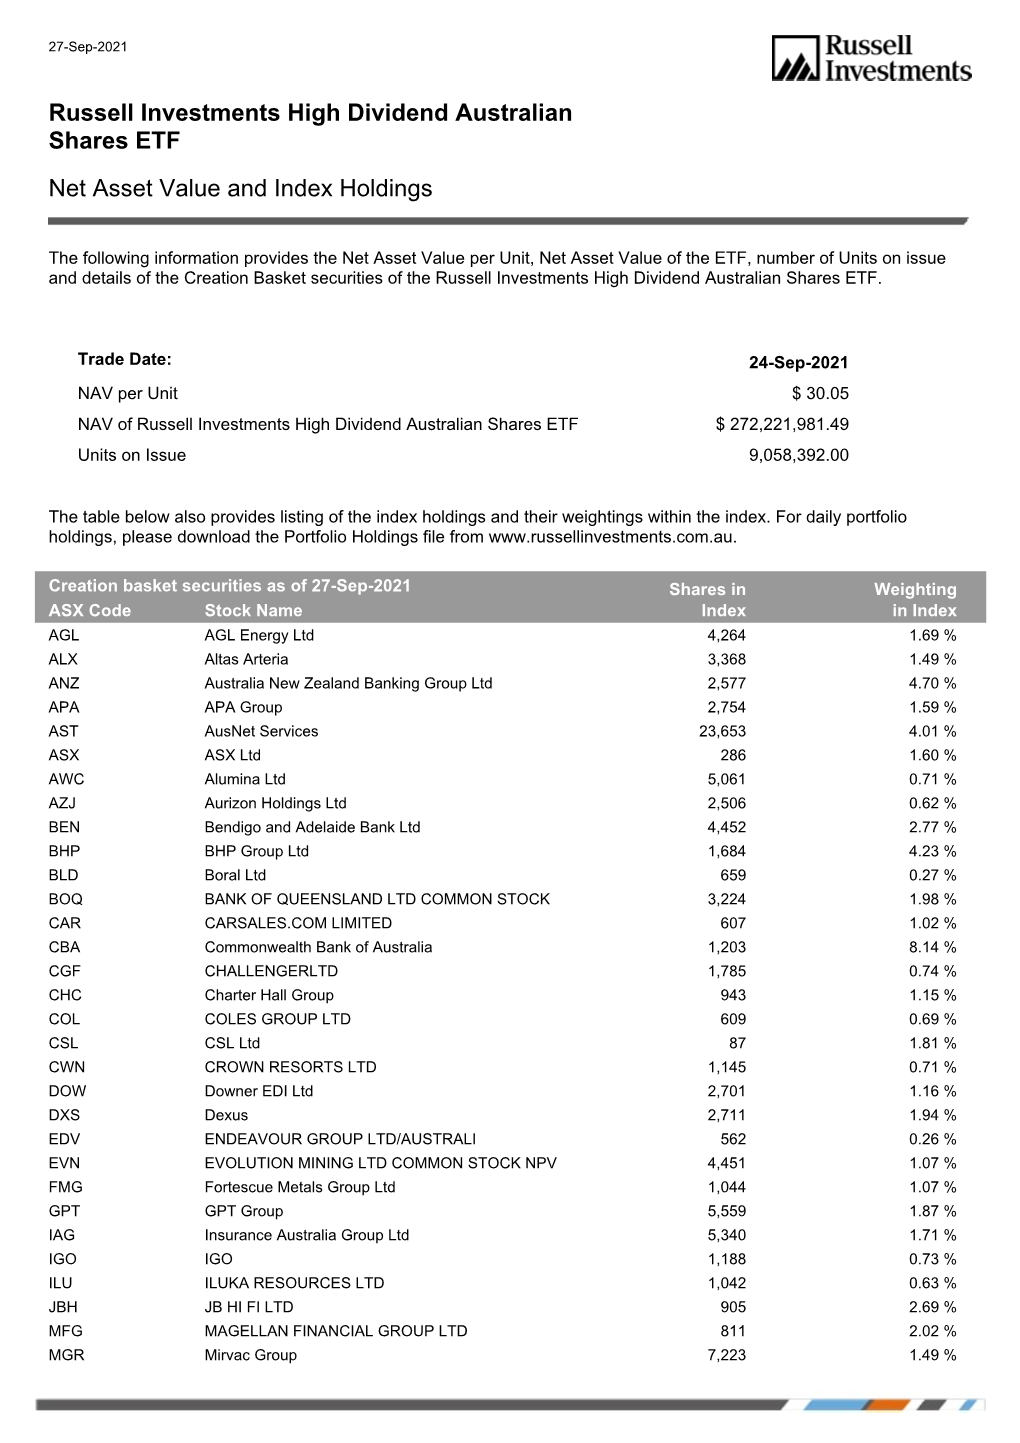 Russell Investments High Dividend Australian Shares ETF Net Asset Value and Index Holdings